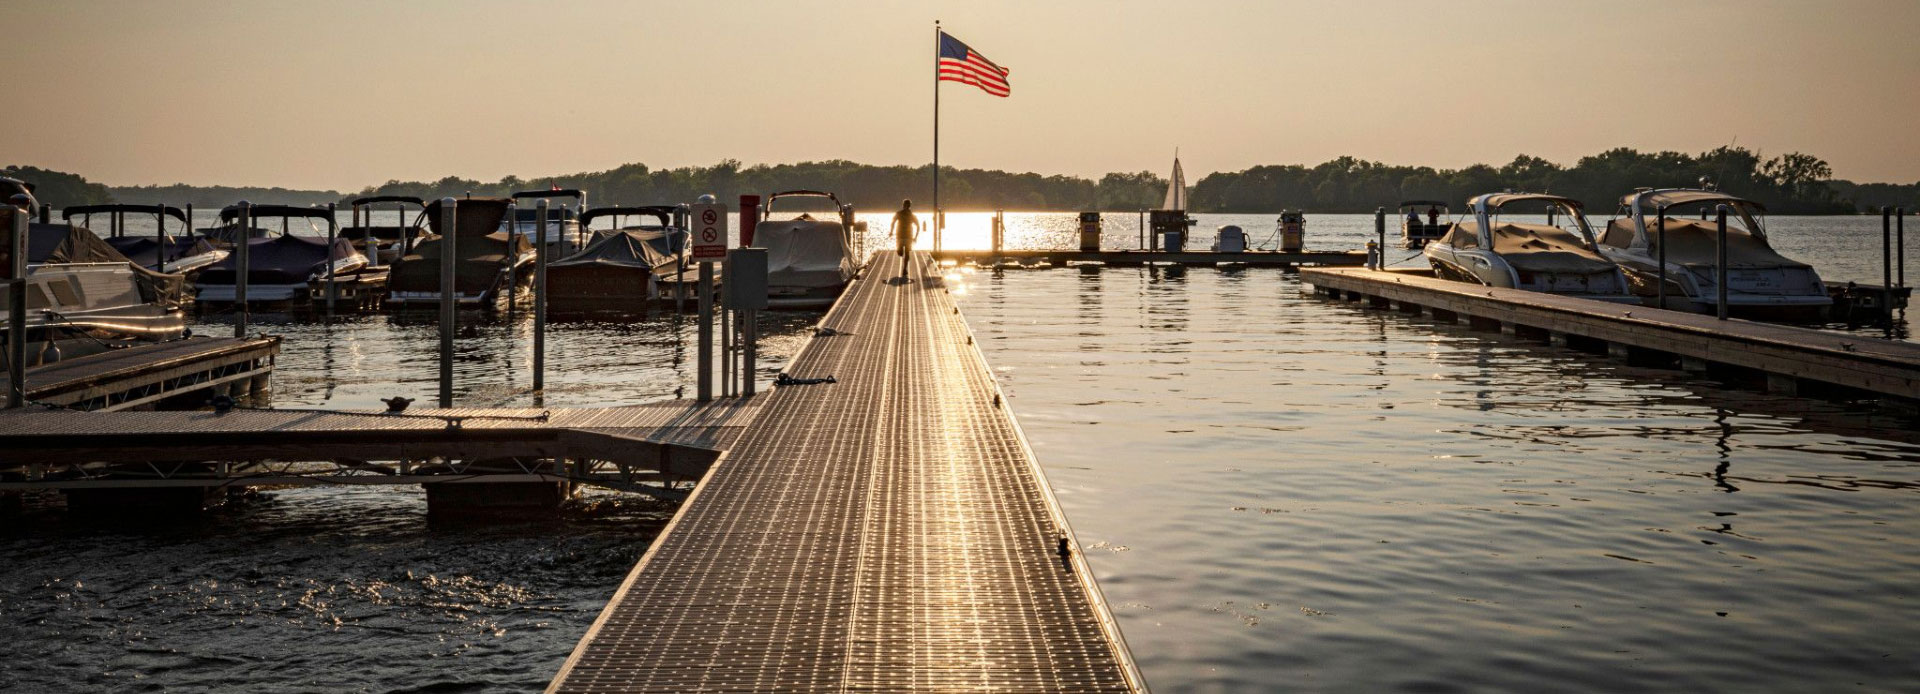 Dock with American Flag